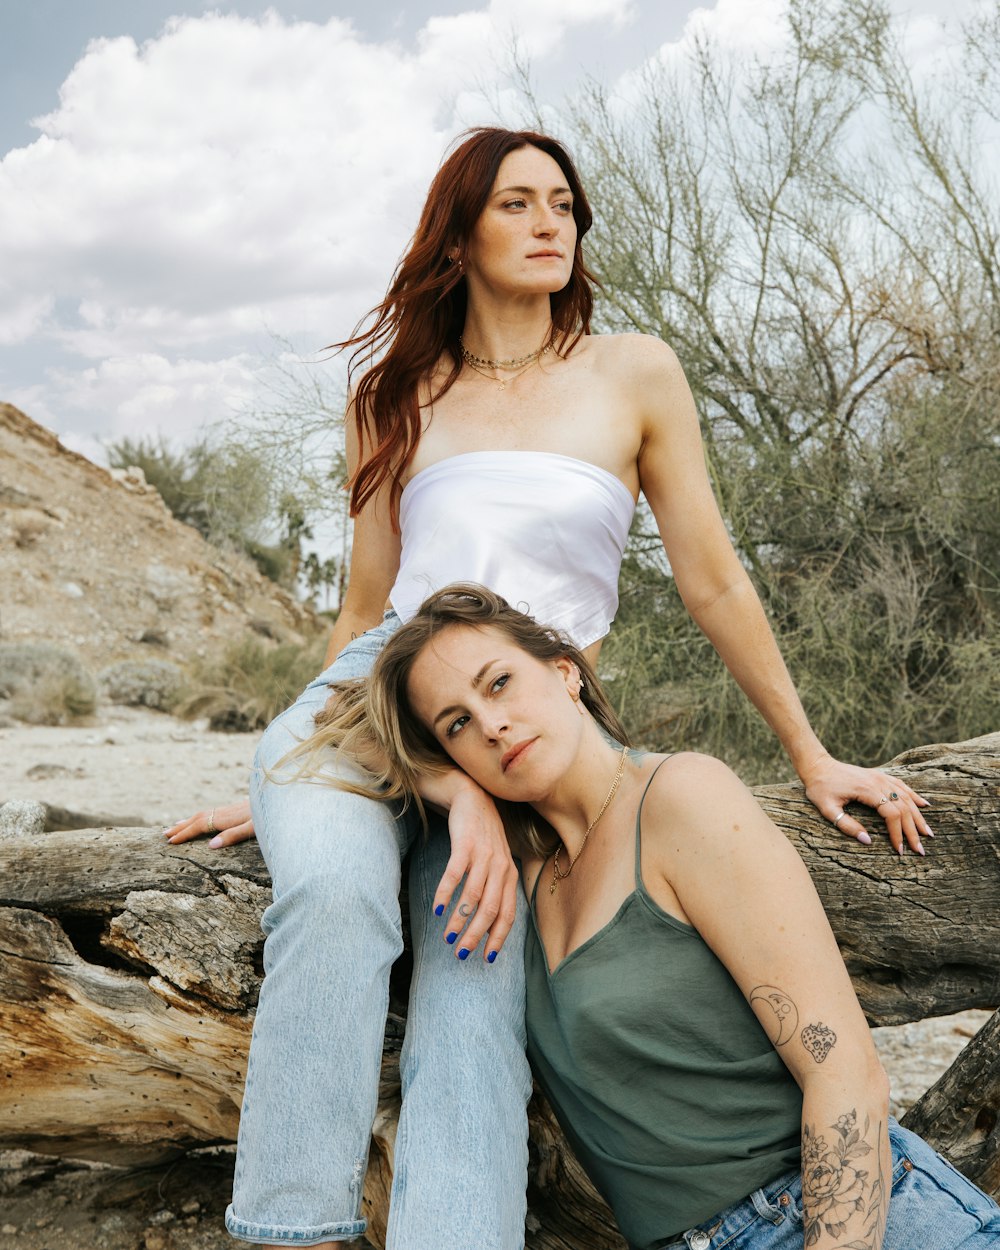 a woman sitting on a log next to another woman